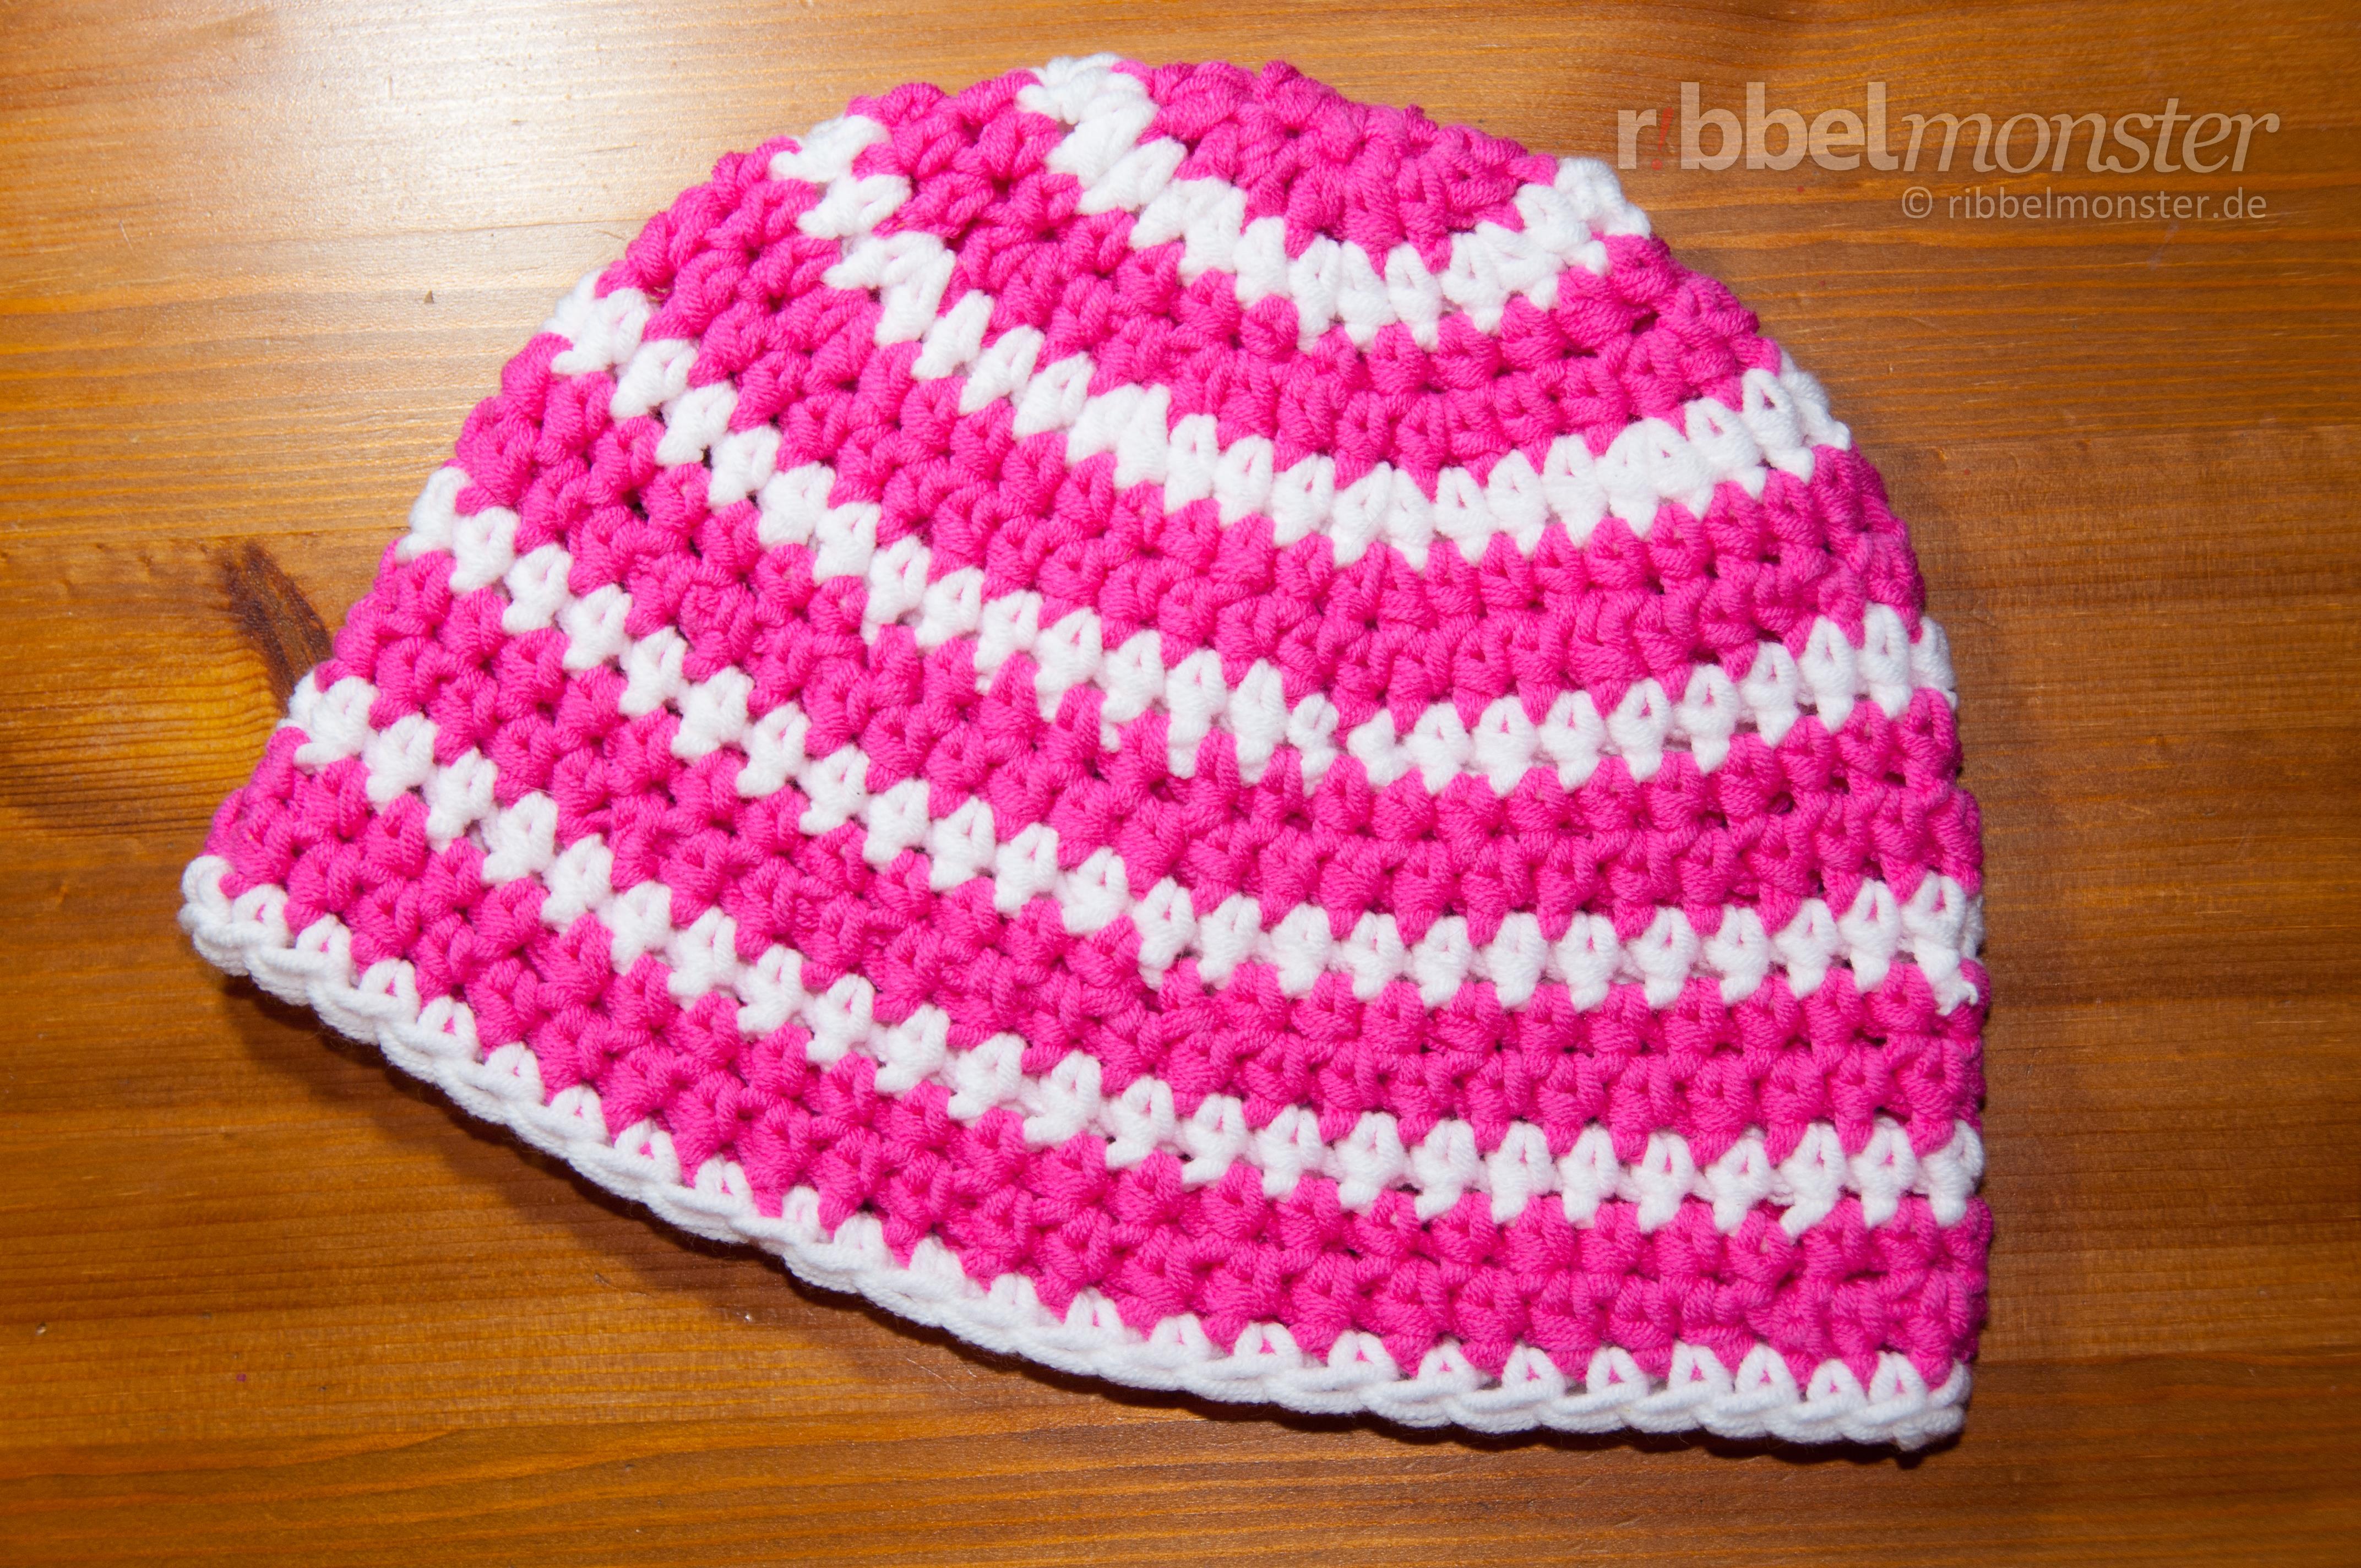 Crochet Hat Beanie With Half Treble Crochet Stitches In Circle Rounds Premium Free Patterns Ribbelmonster